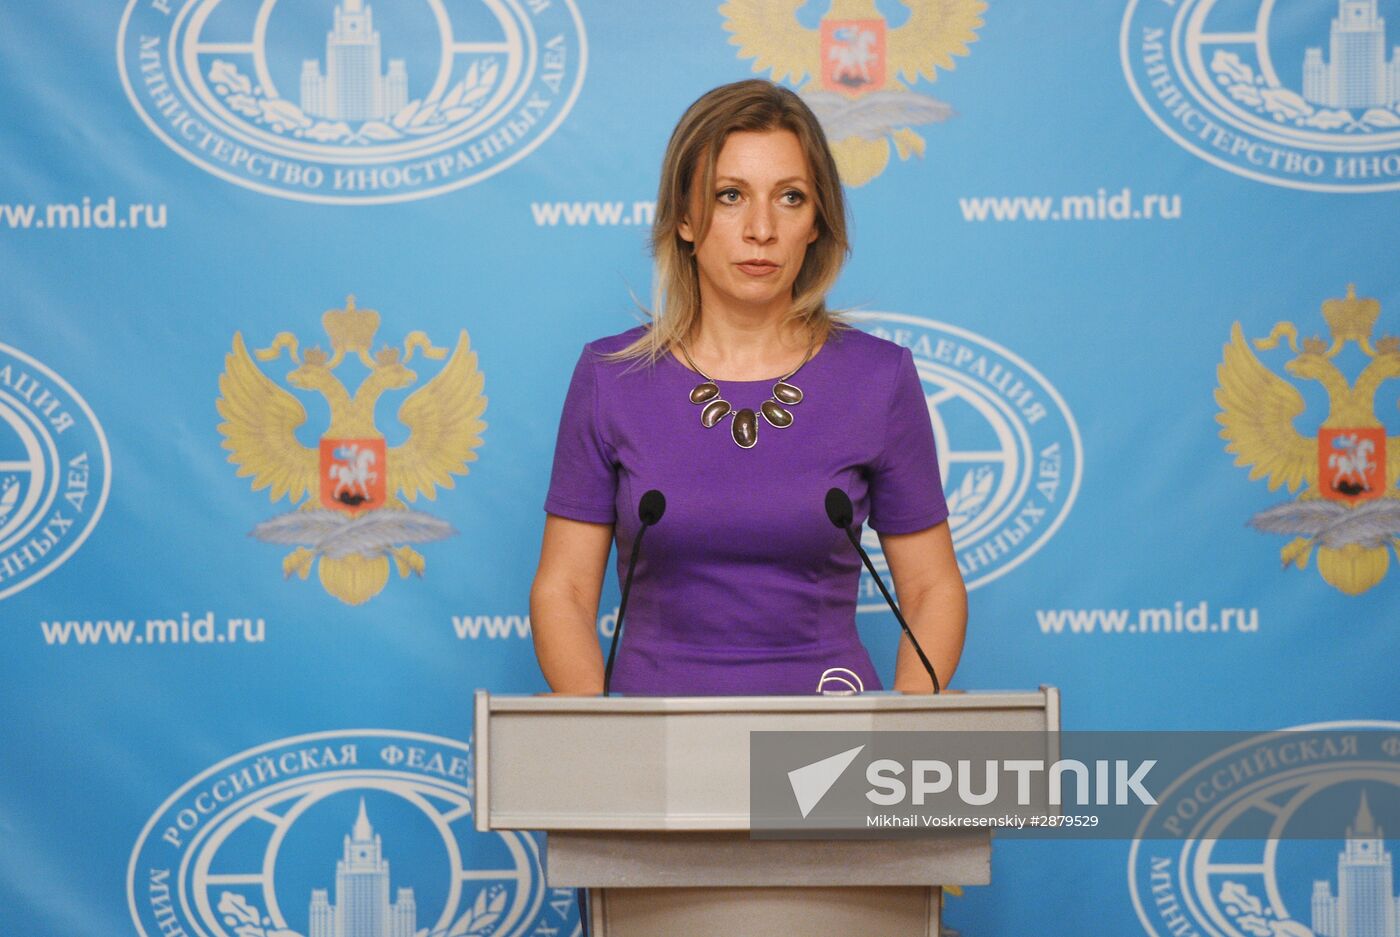 Briefing by maria Zakharova on current political affairs